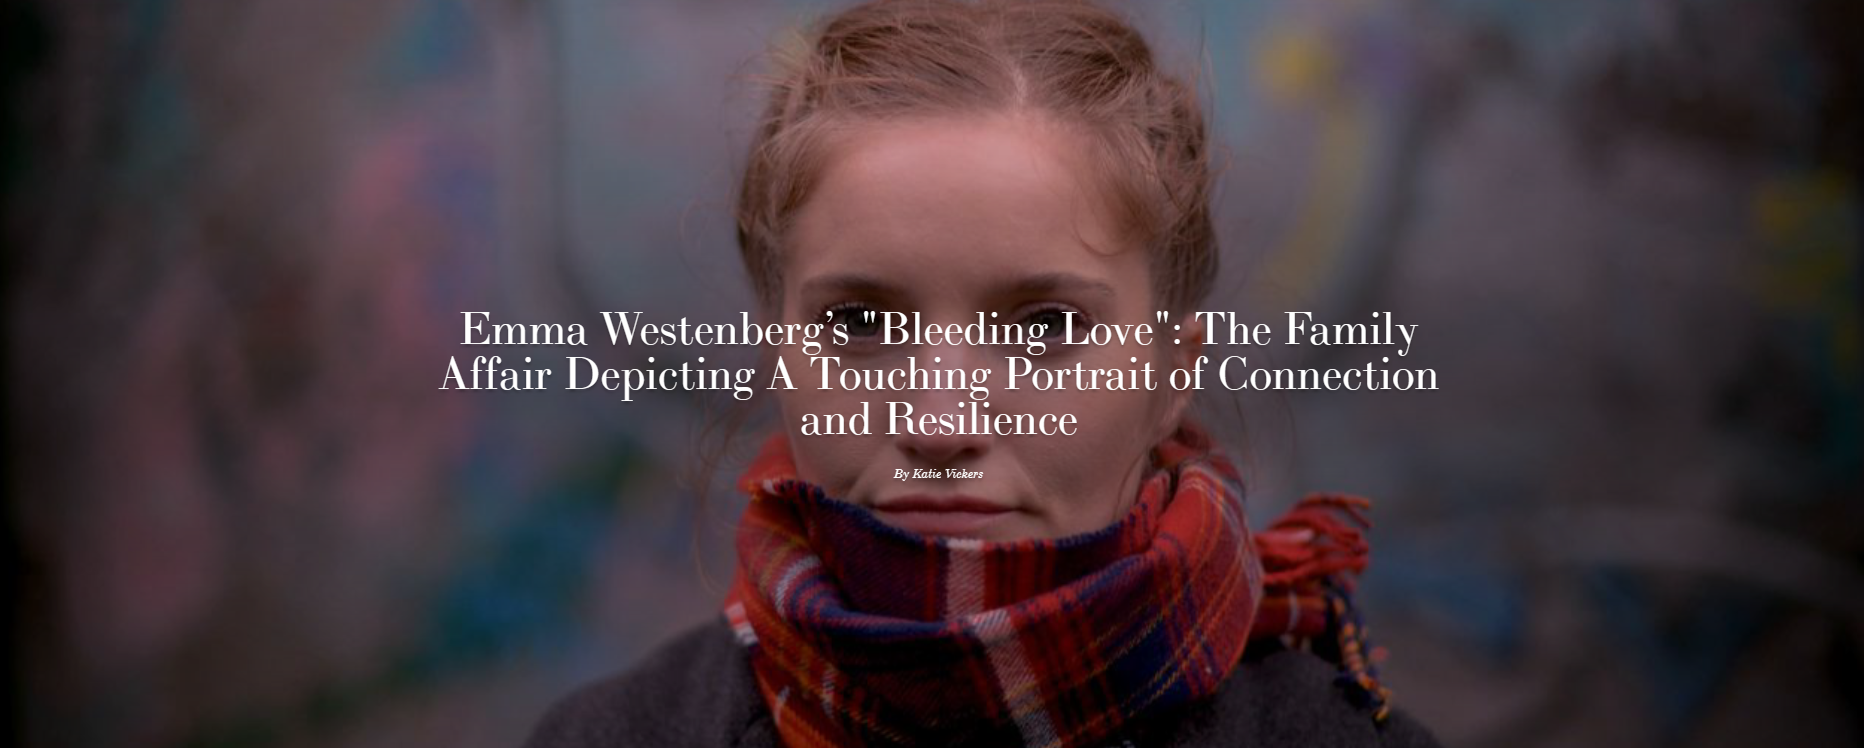 Emma Westenberg’s “Bleeding Love”: The Family Affair Depicting A Touching Portrait of Connection and Resilience